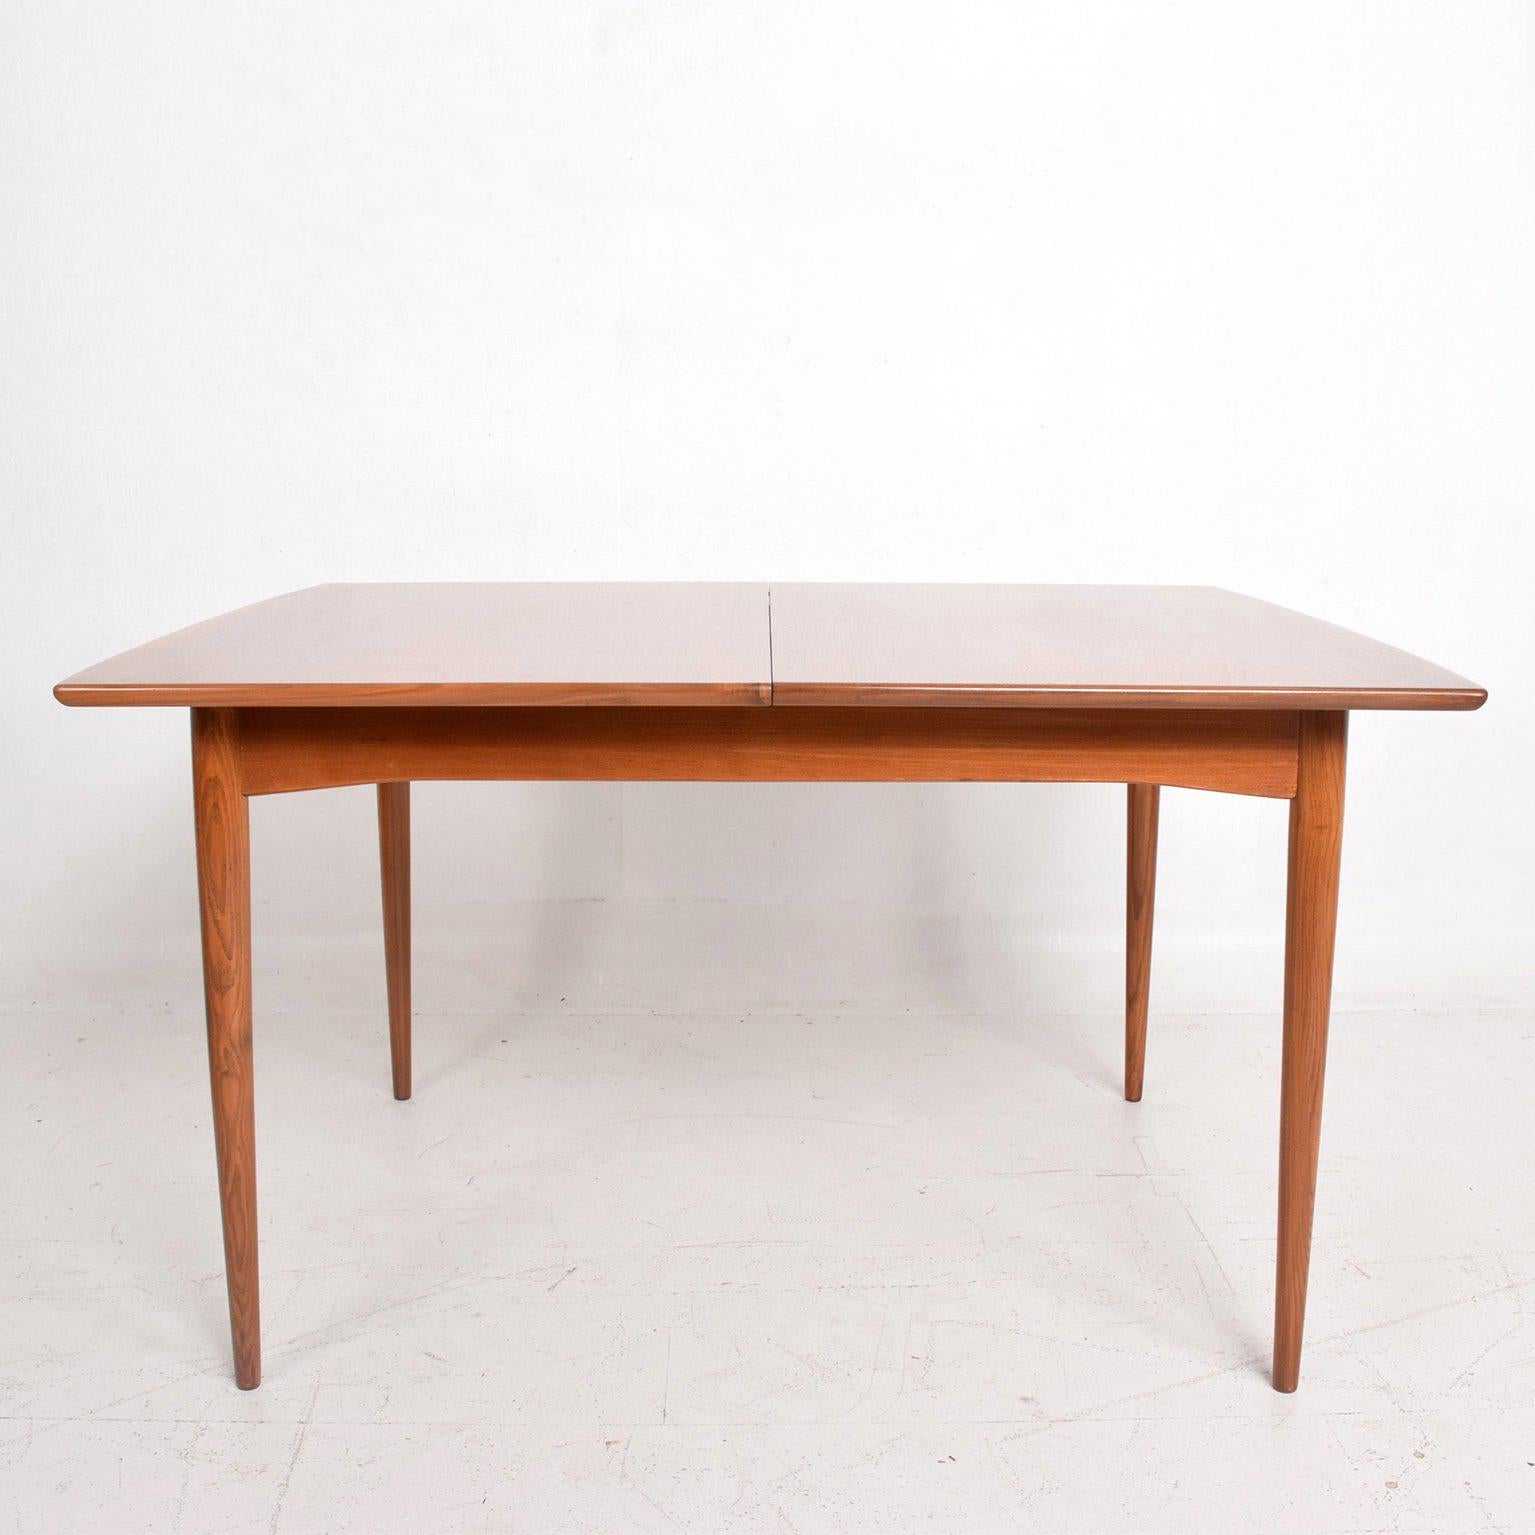 American Mid-Century Modern Walnut Dining Table with Built in Extension